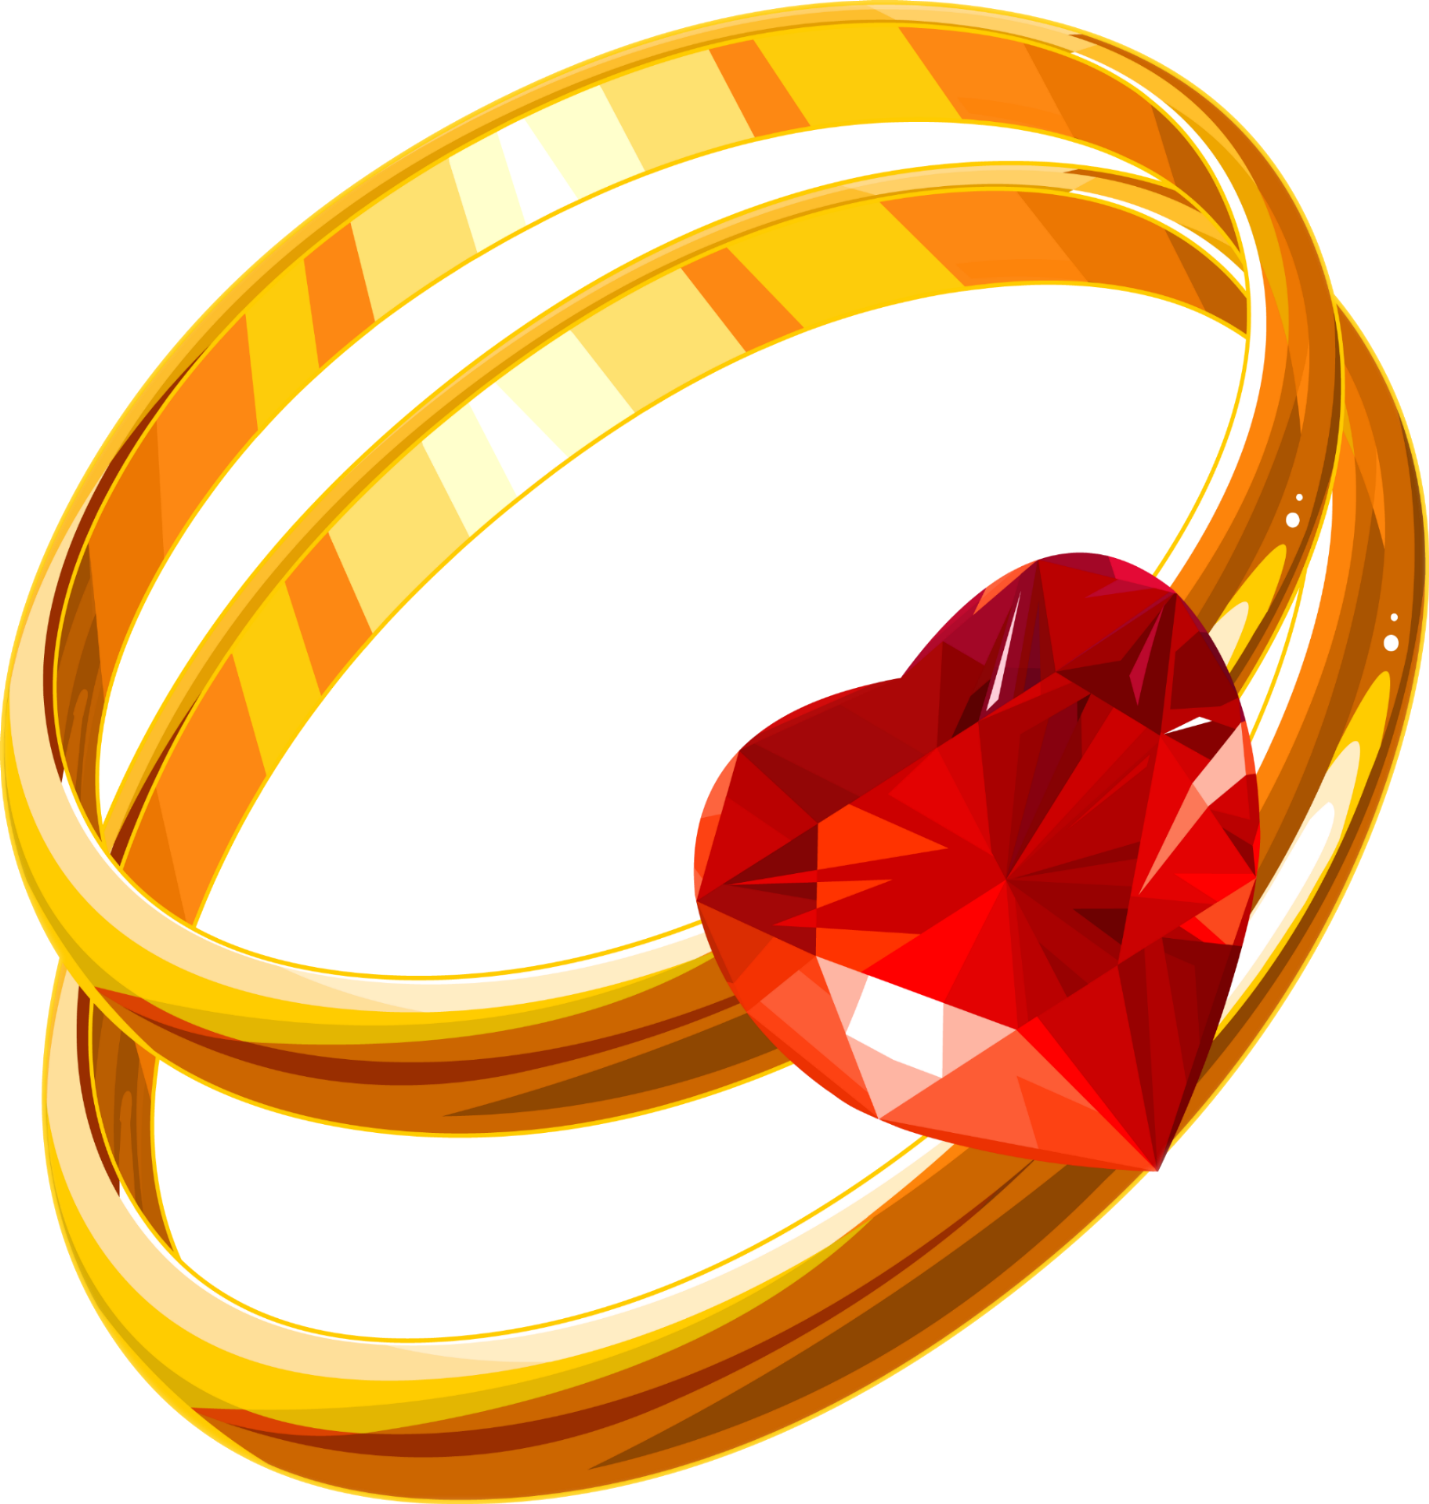 Ring Ceremony Clipart PNG Images, The Golden Ring For Wedding Ceremony,  Cincin, Emas, Love PNG Image For Free Download